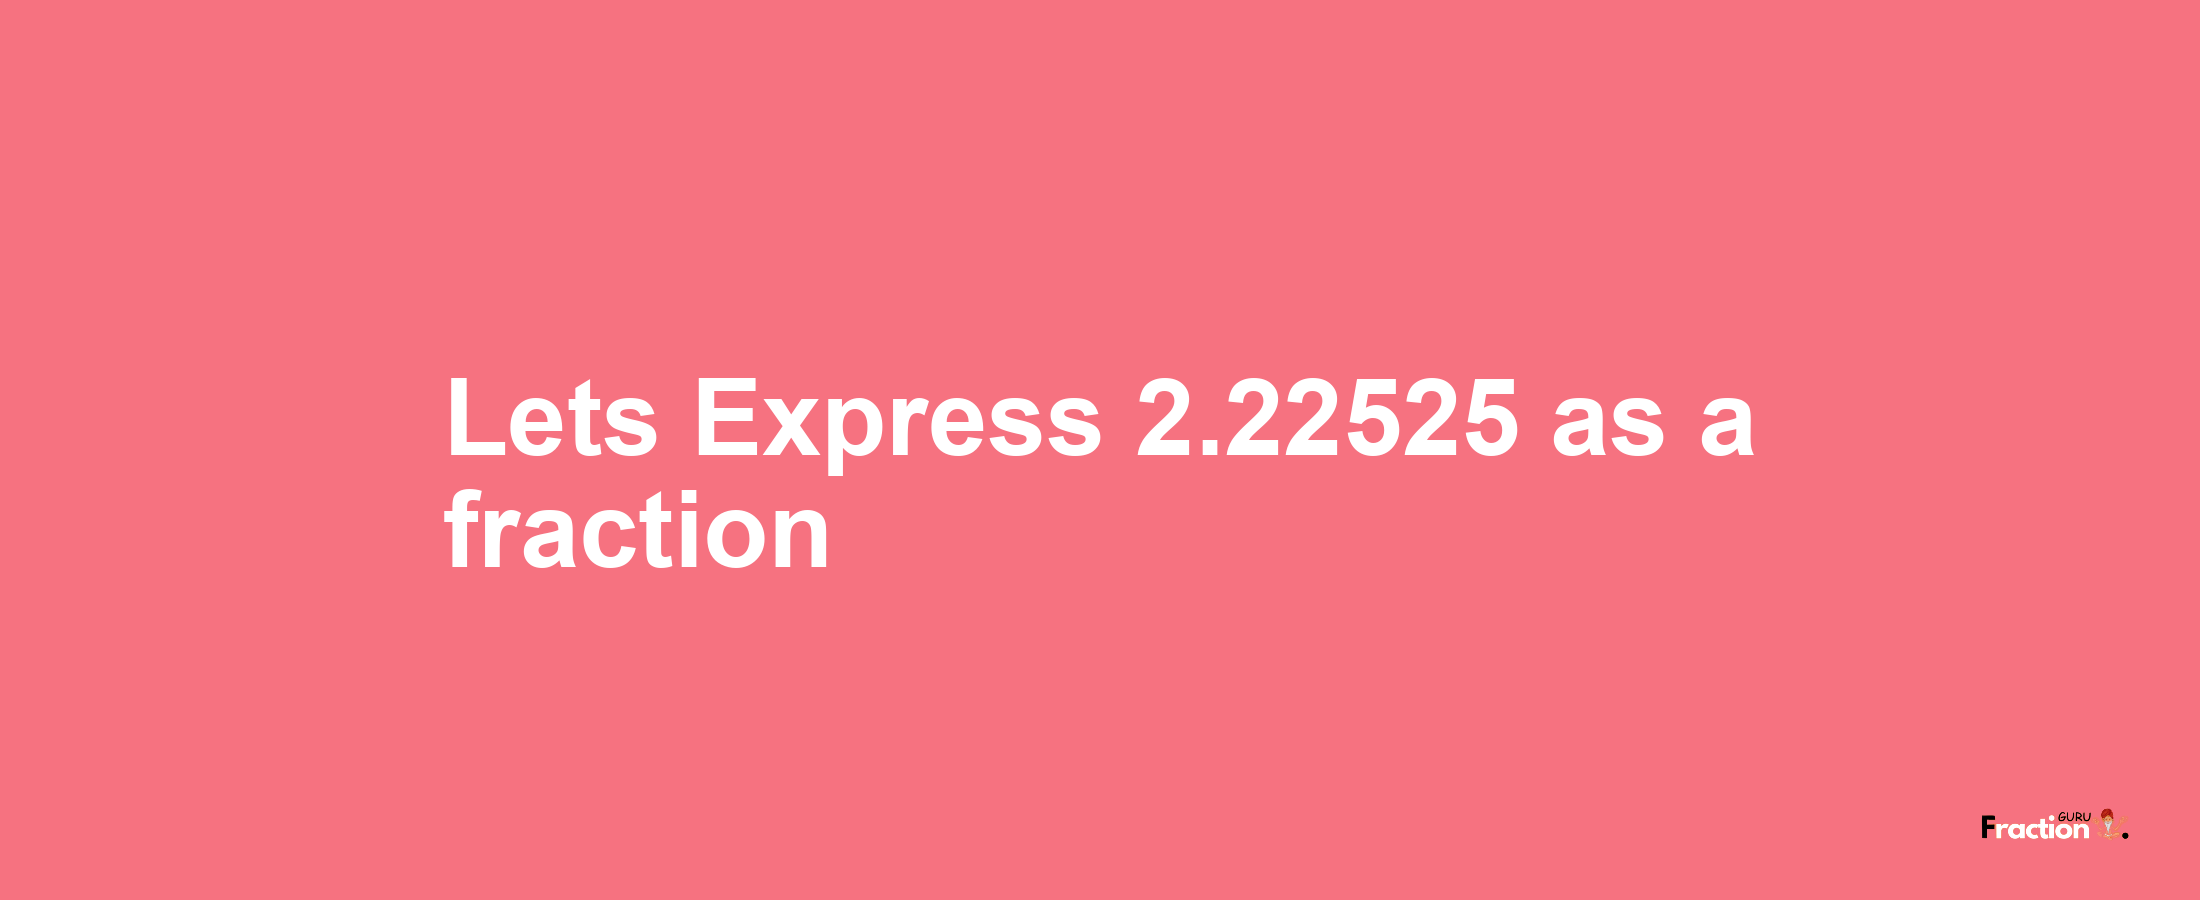 Lets Express 2.22525 as afraction